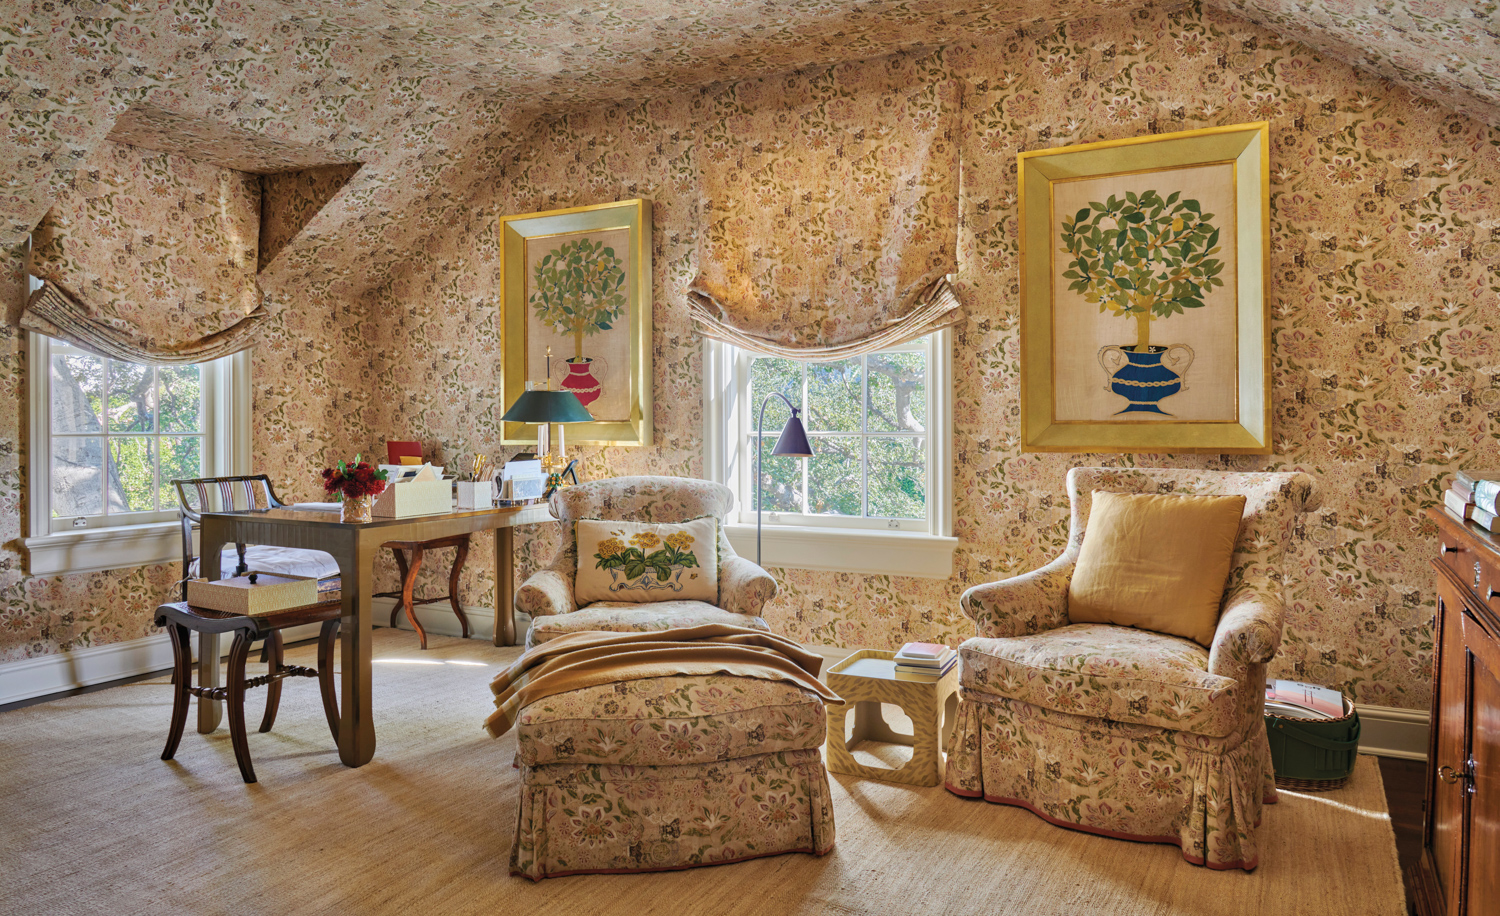 Room designed by Suzanne Rheinstein with patterned wallpaper, window treatments, armchairs and ottoman. A wooden desk and chair are in the corner.